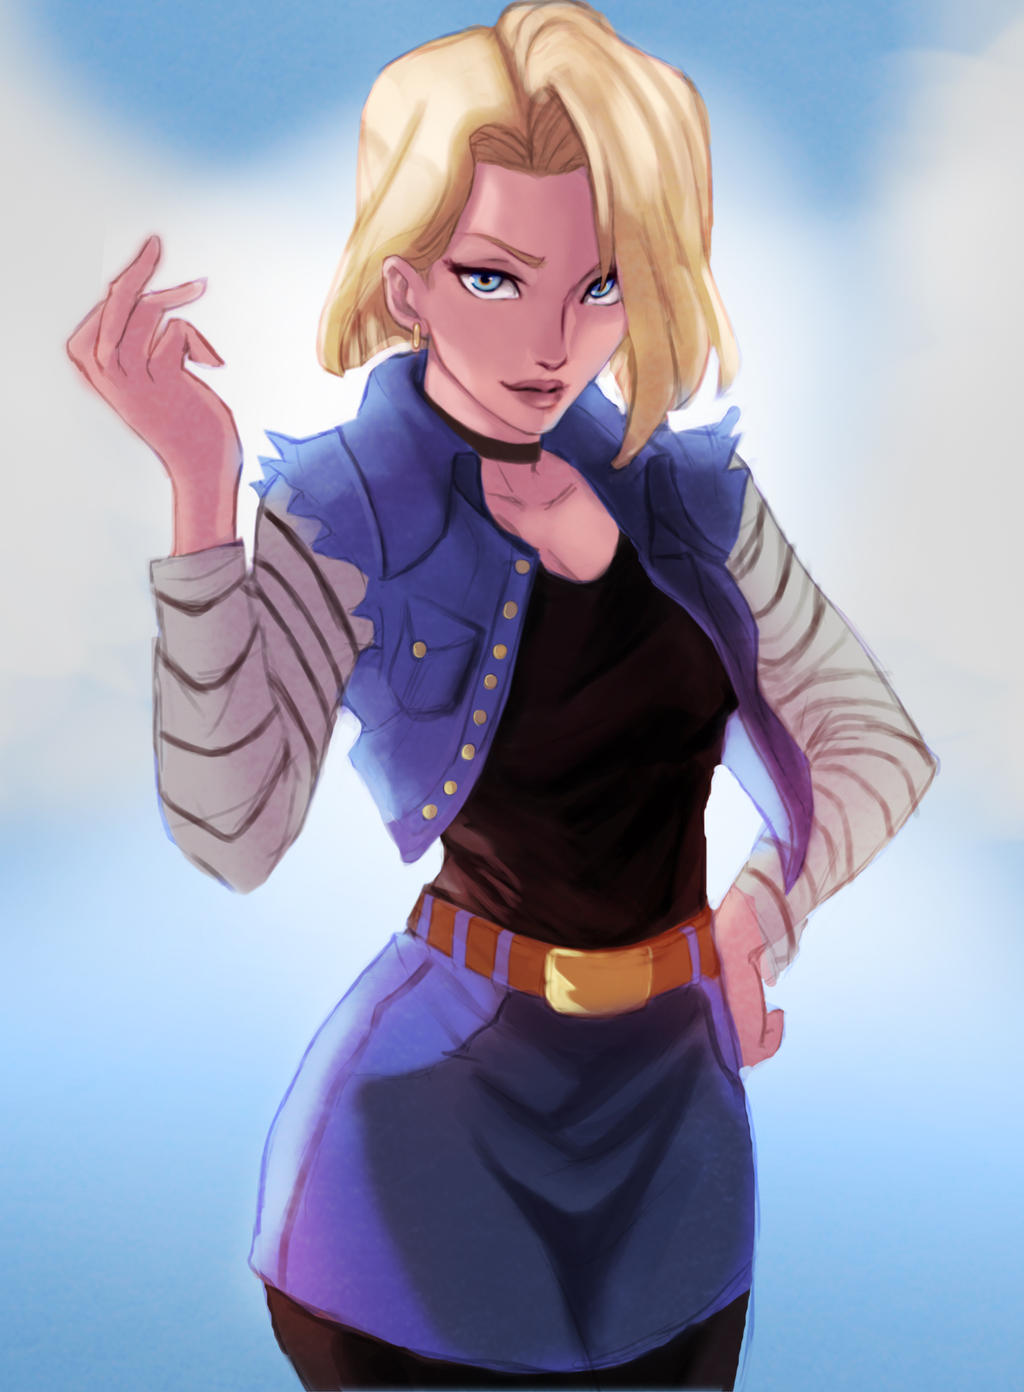 Android 18 by Yona-Art on DeviantArt